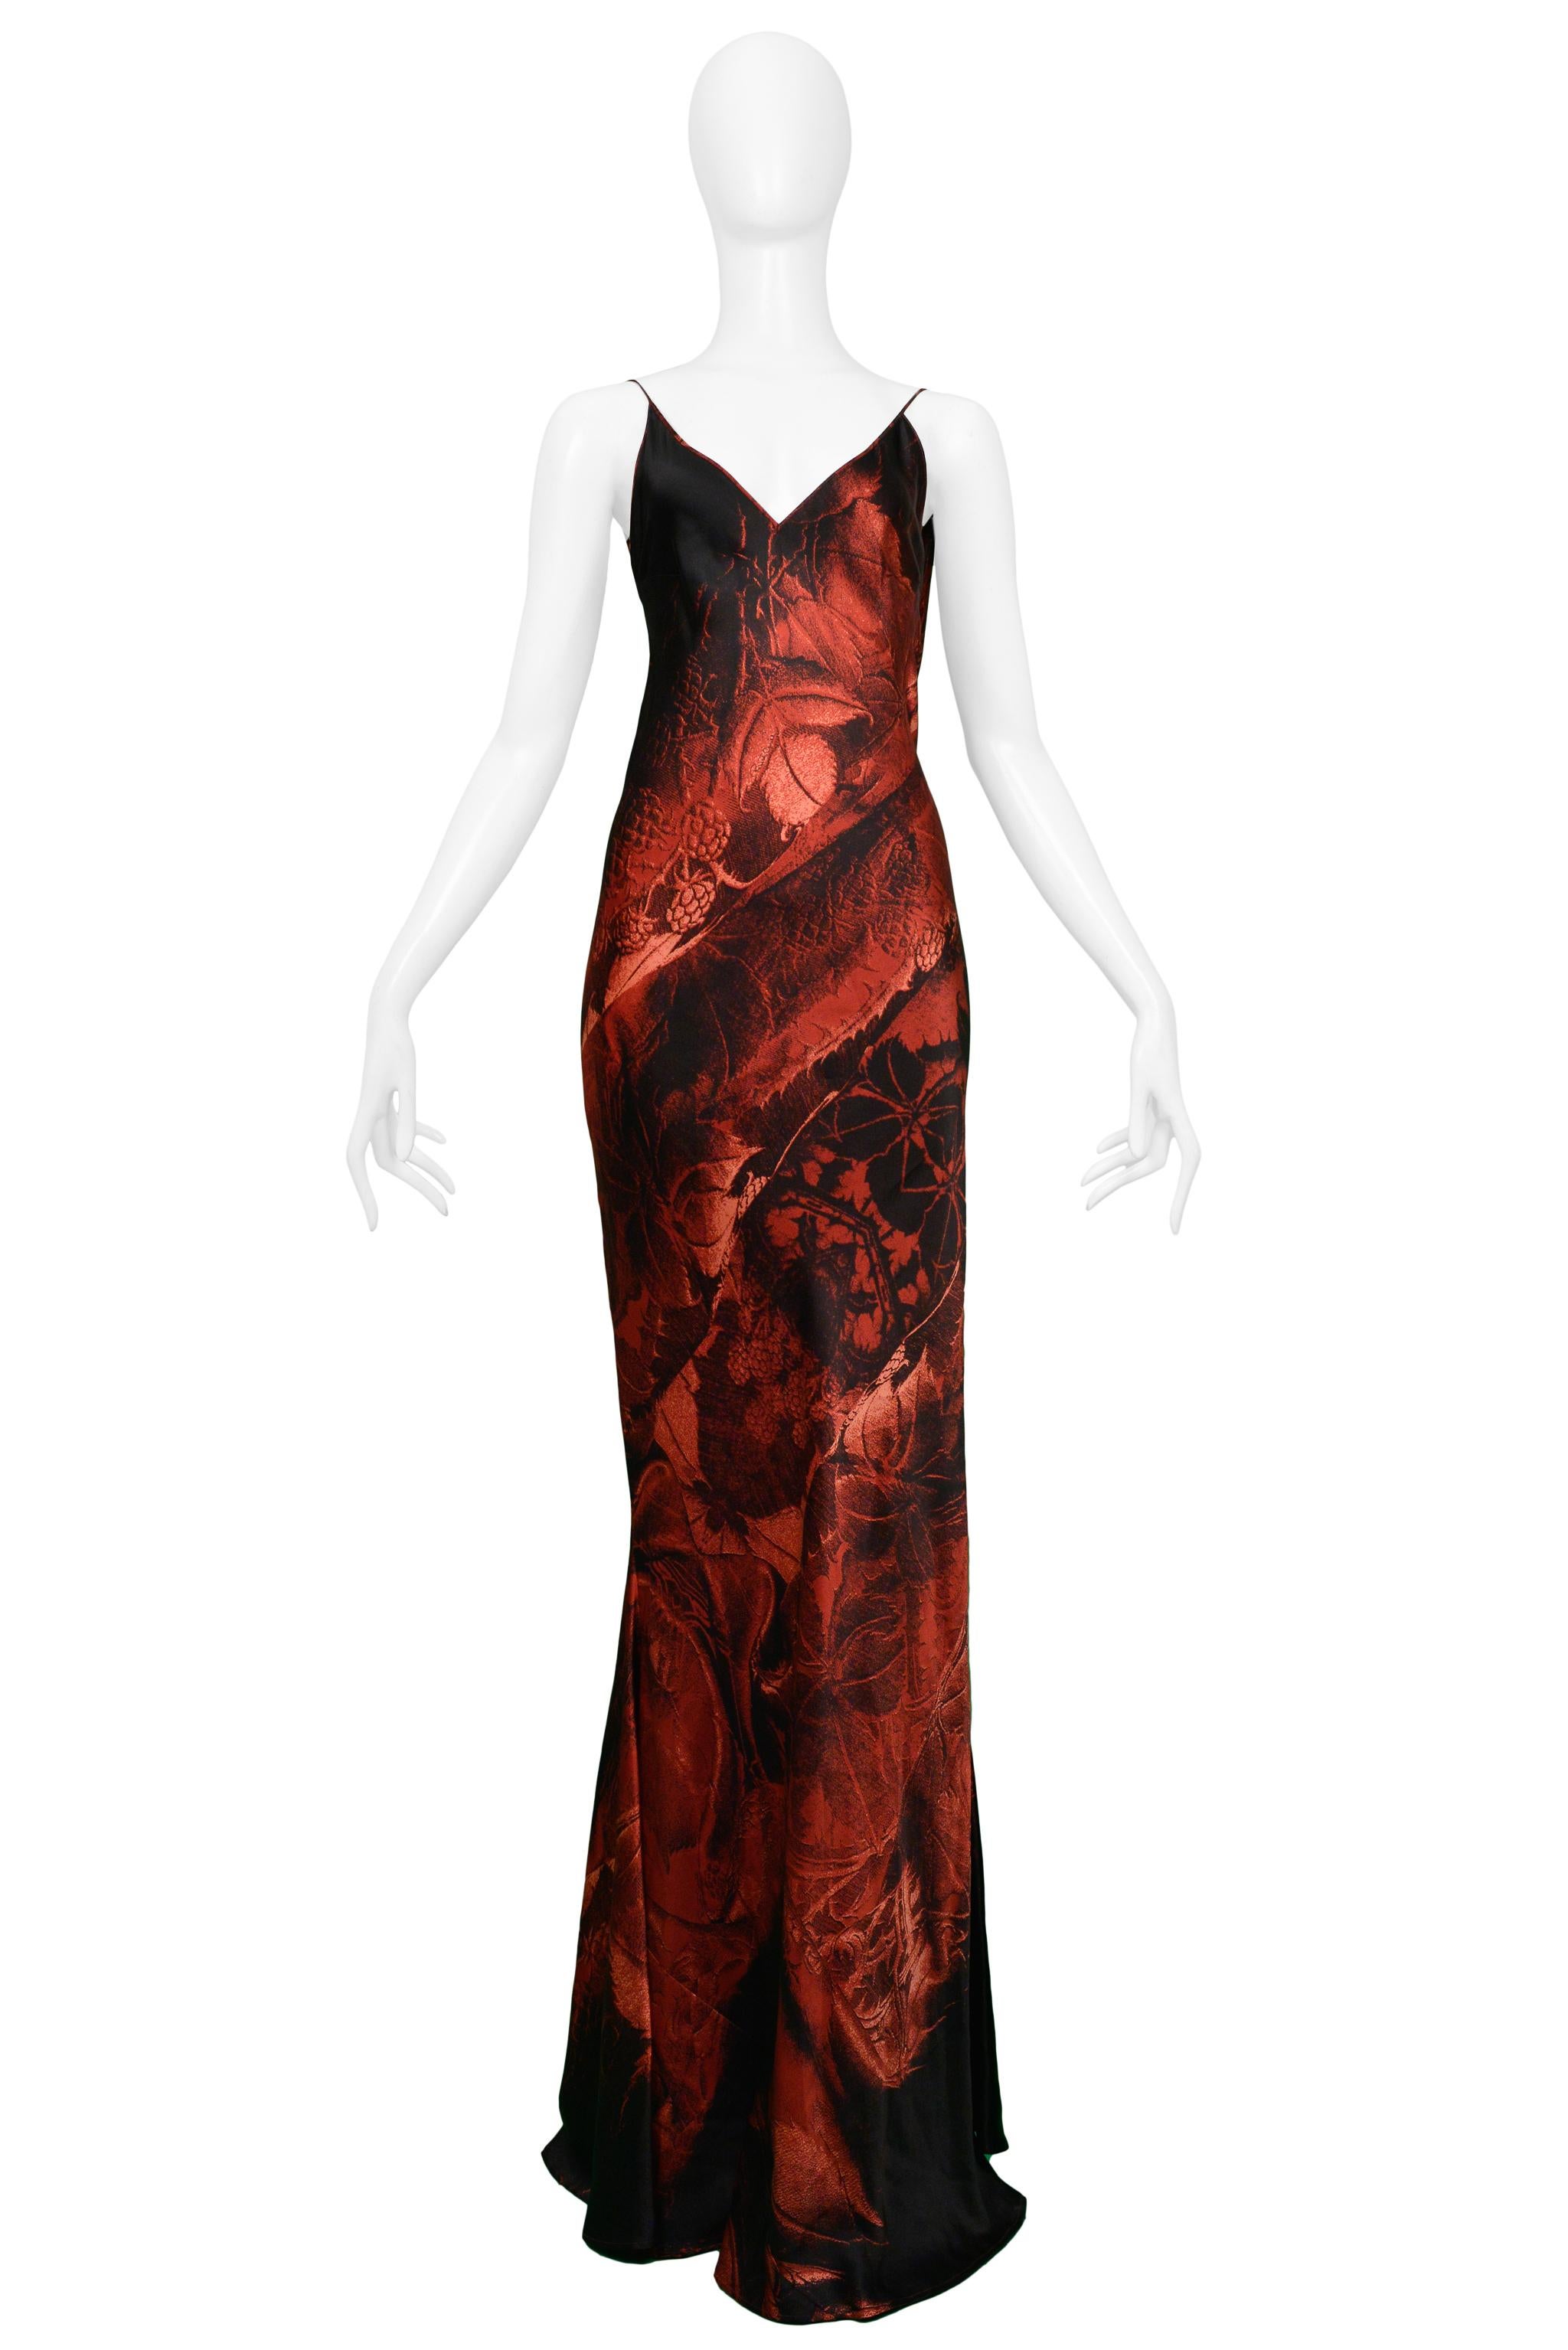 Resurrection Vintage is excited to present a vintage Roberto Cavalli silk evening gown featuring a red and black abstract floral print and draped open back.

Roberto Cavalli
Size: Medium
Silk
Excellent Vintage Condition 
Authenticity Guaranteed 
